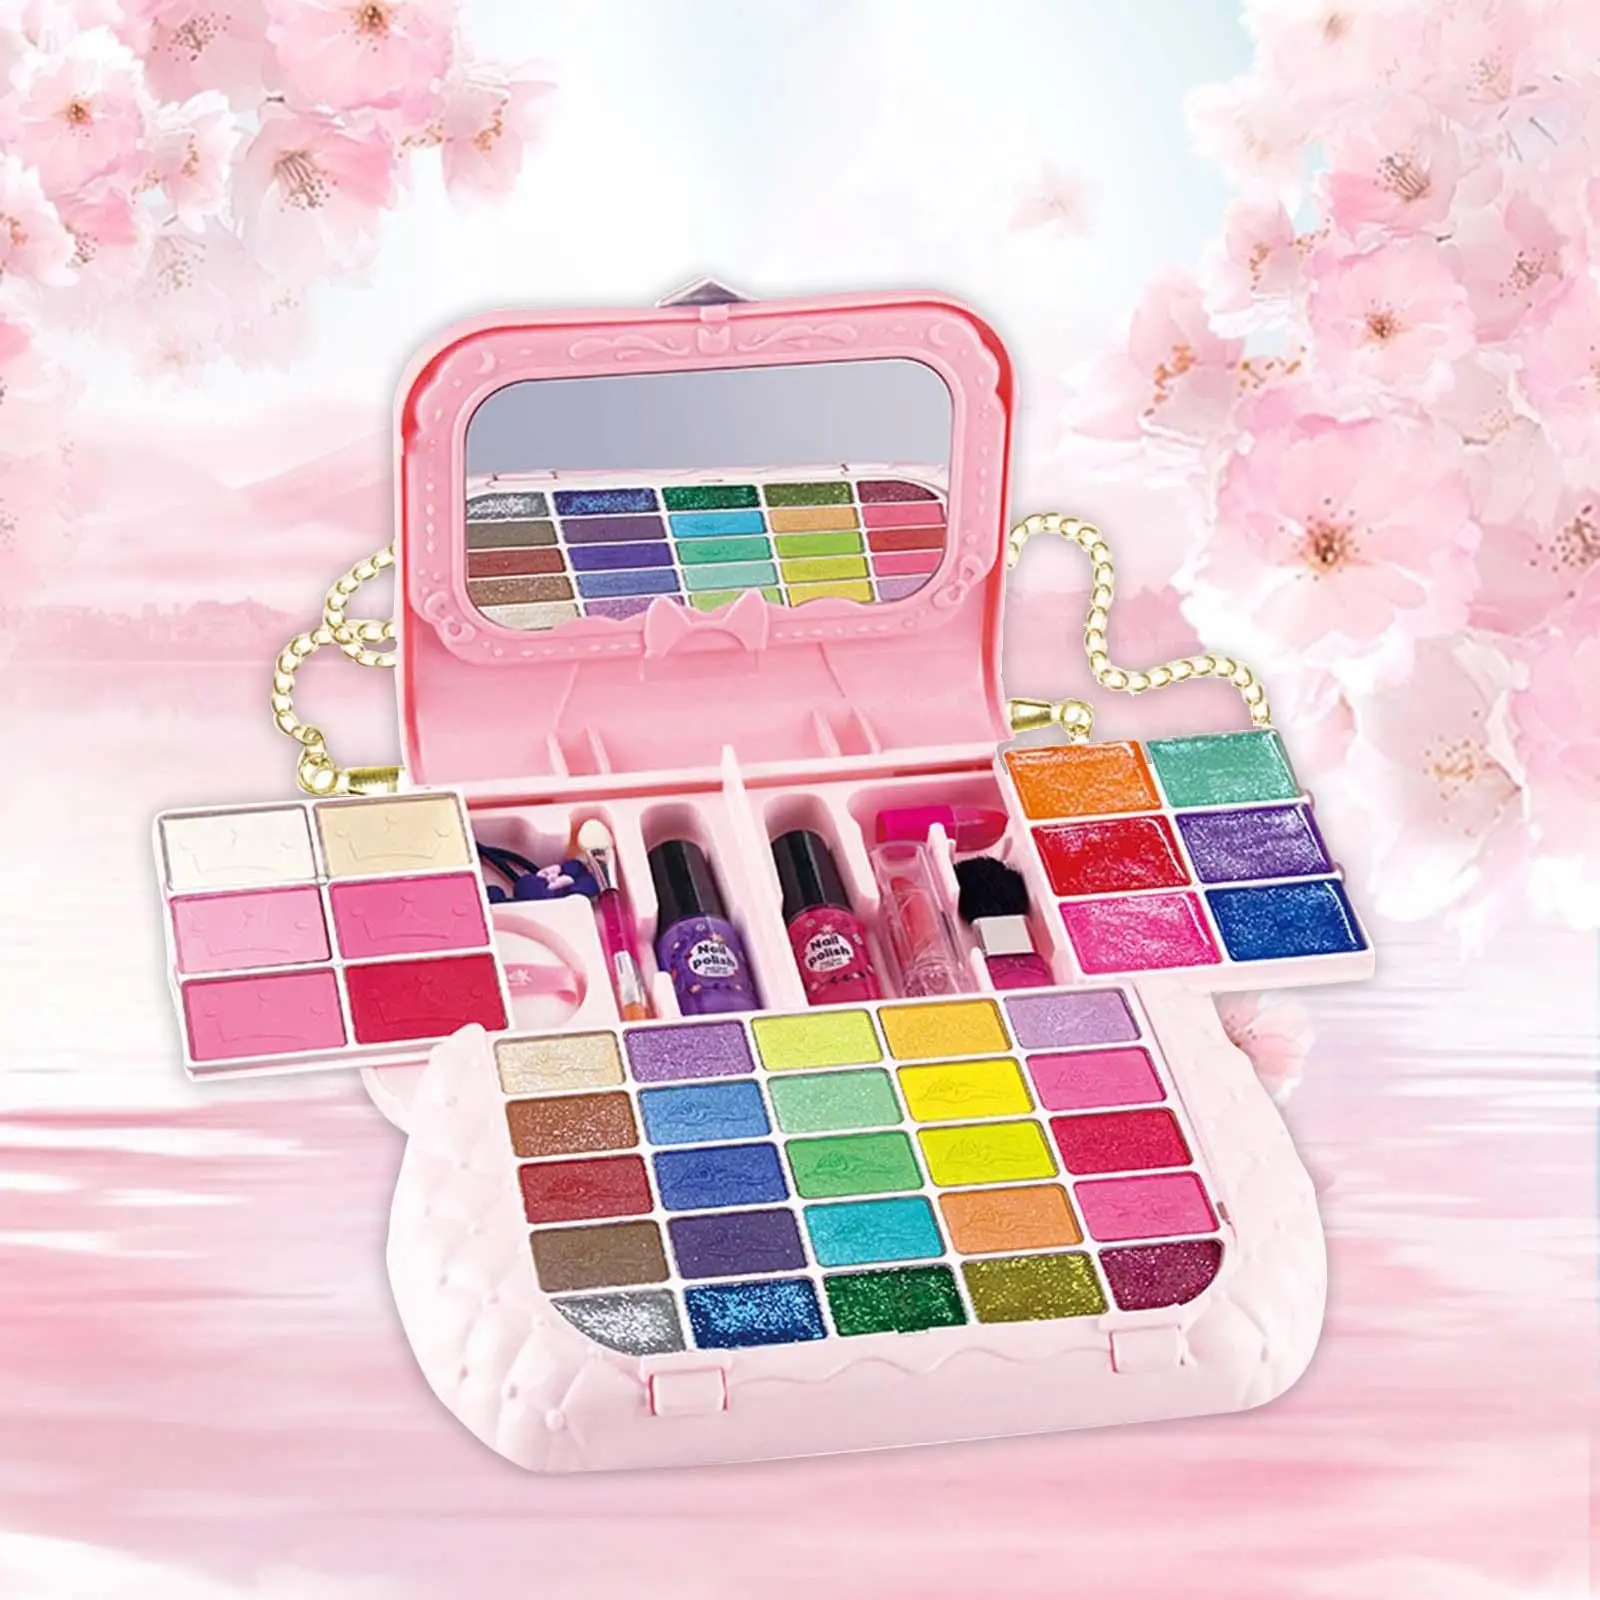 

Makeup Toy Kits Pretend Play Makeup Beauty Set Kids Washable Makeup Girls Toys for Toddlers Girls Age 3 4 5+ Present Gift